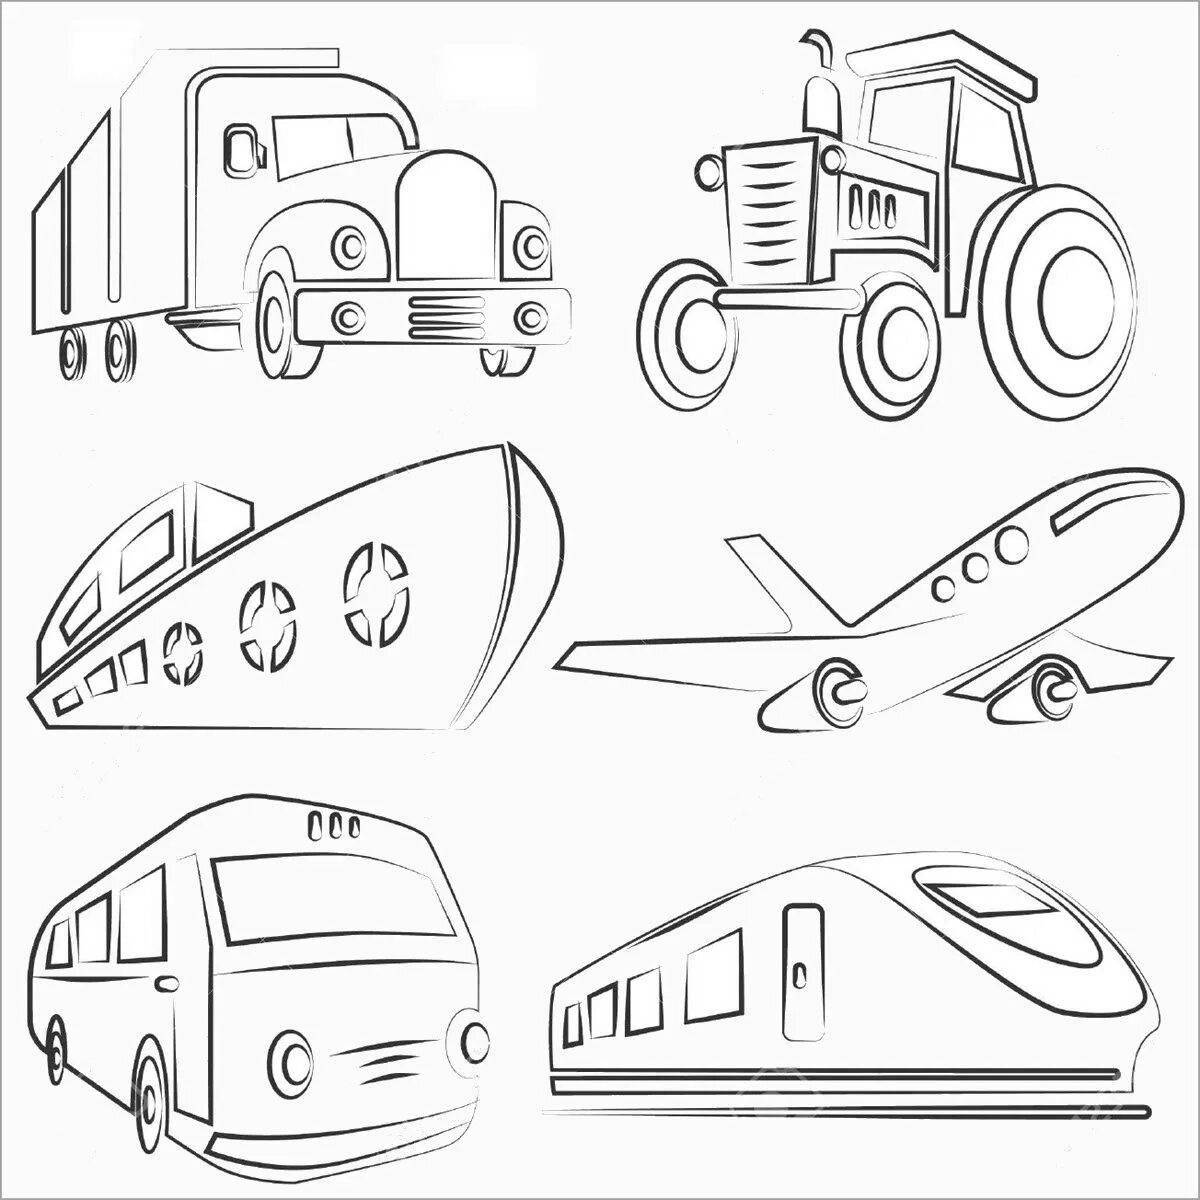 Great coloring book for preschoolers modes of transport